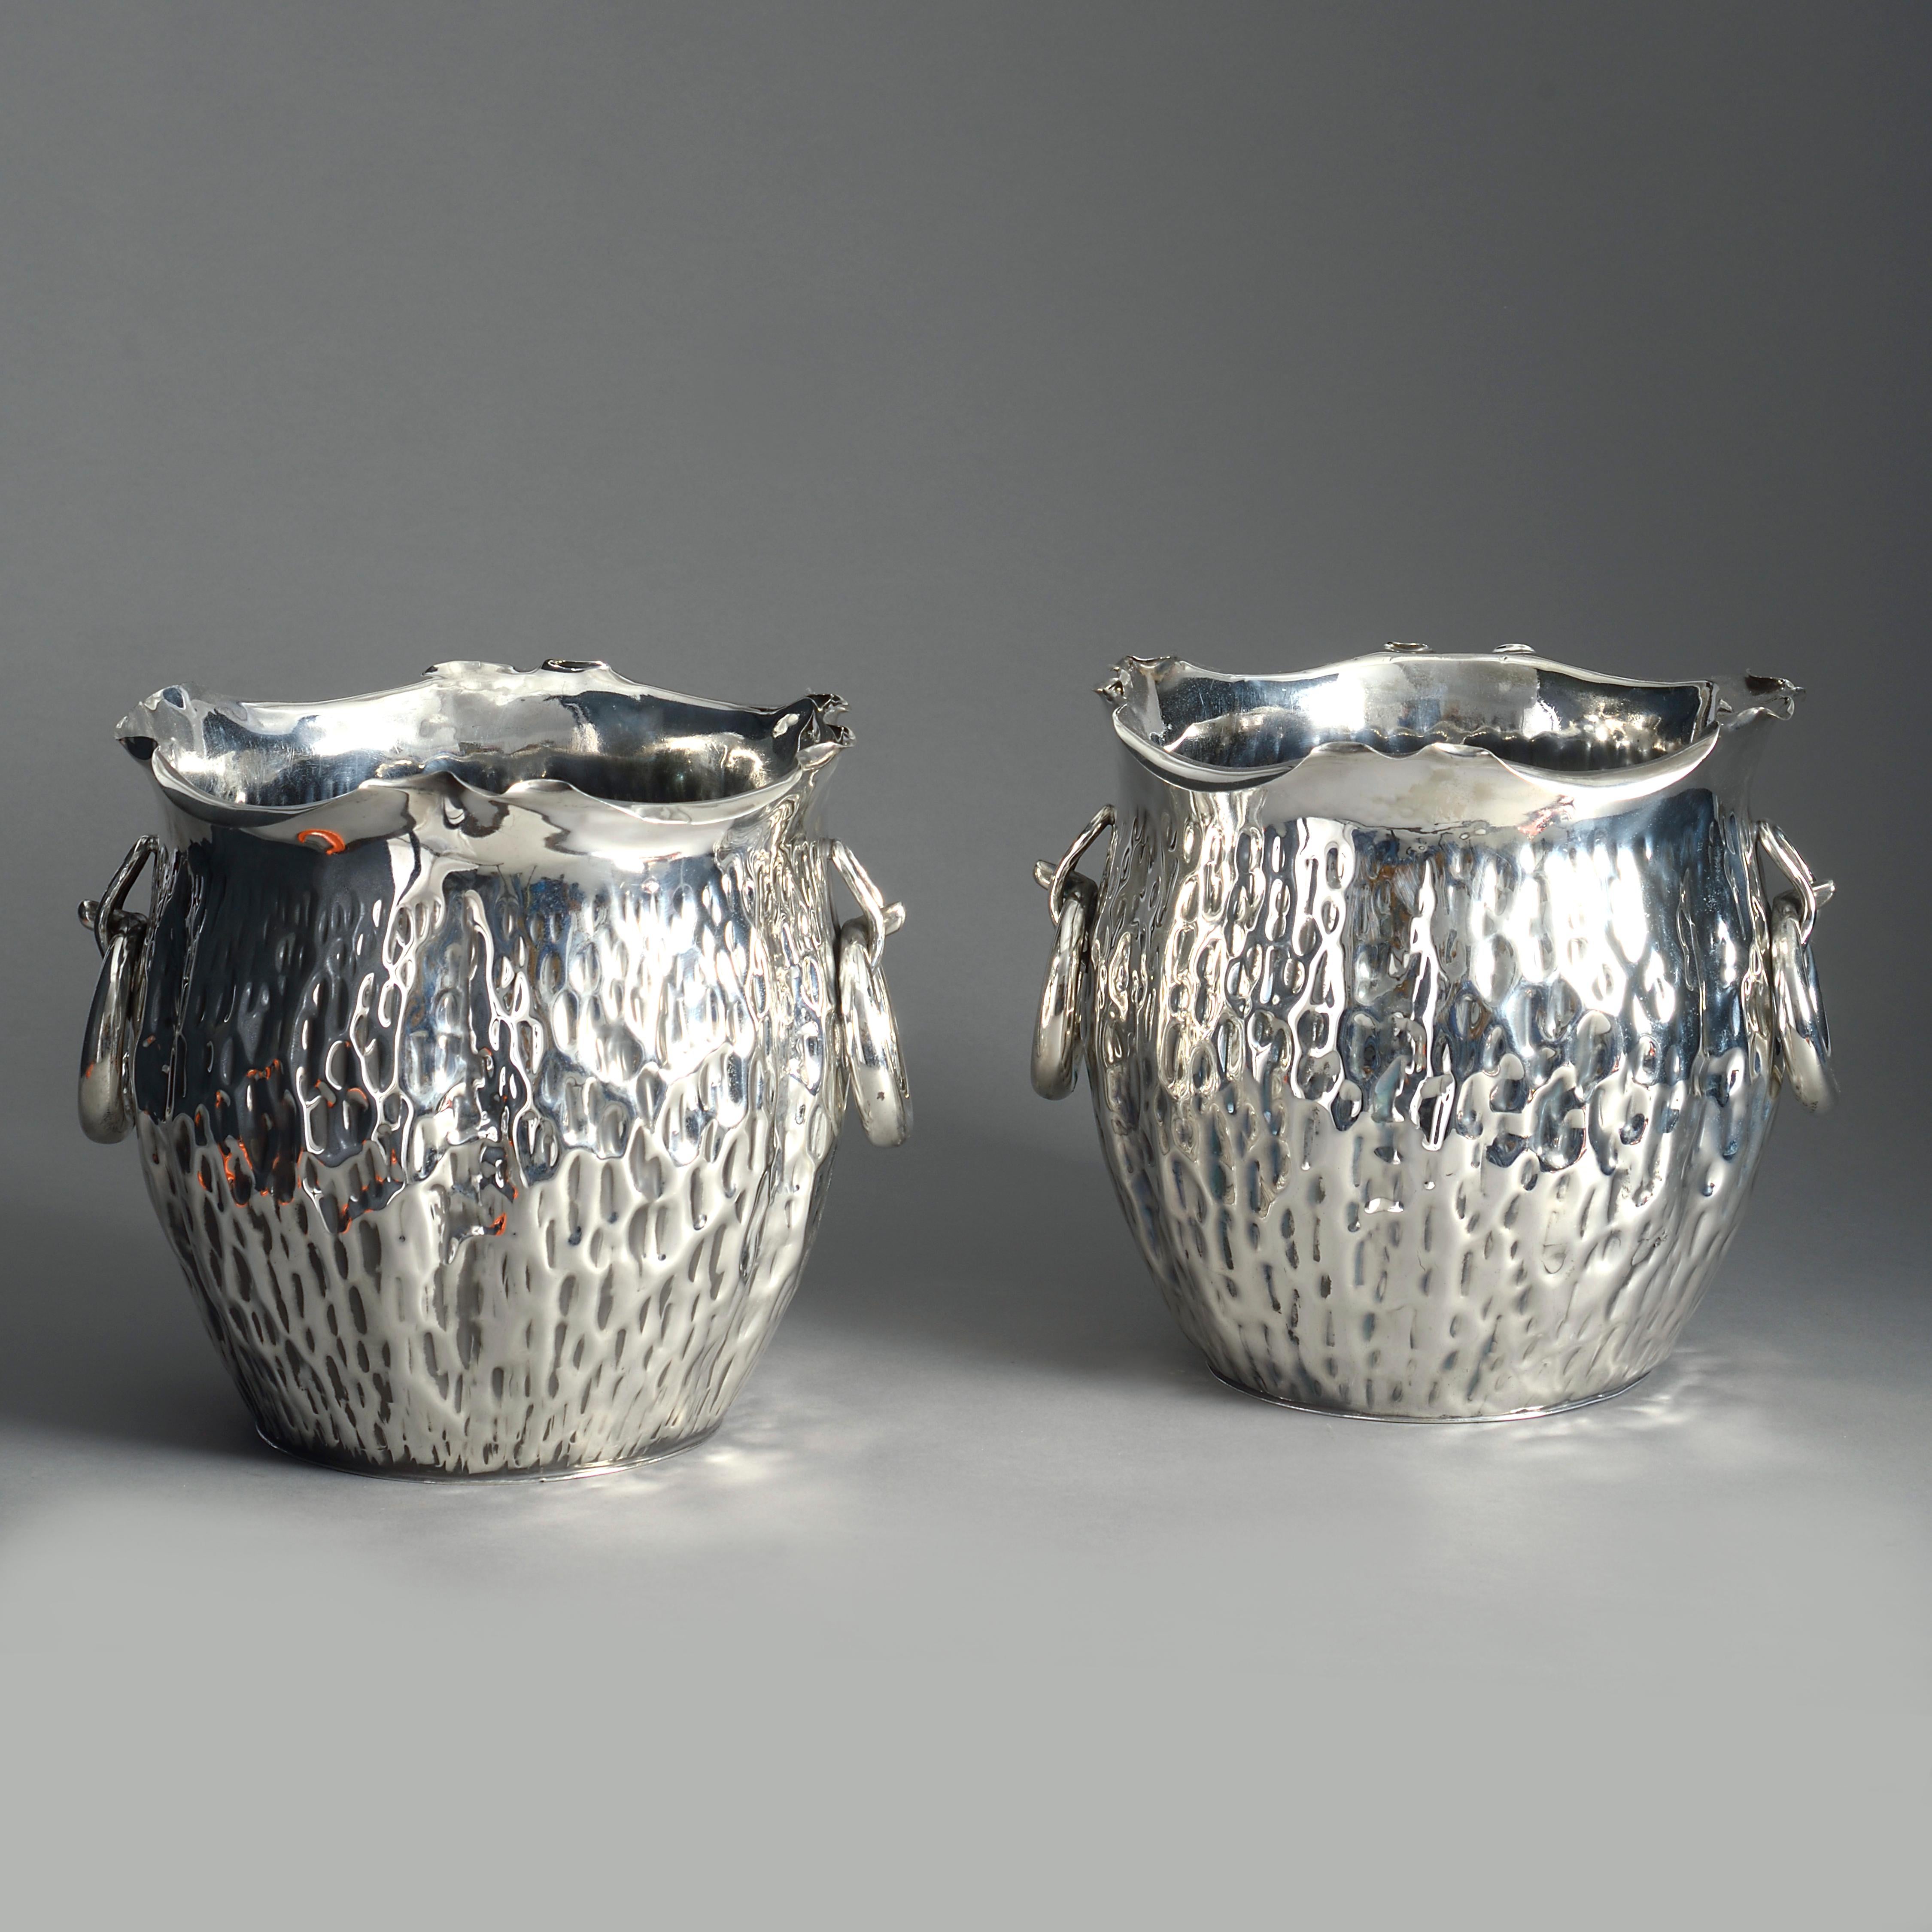 A pair of late 19th century silver plated planters or wine coolers, naturalistically modelled as tree bark and retaining the original ring handles.

With makers stamps for Hukin & Heath to the underside.